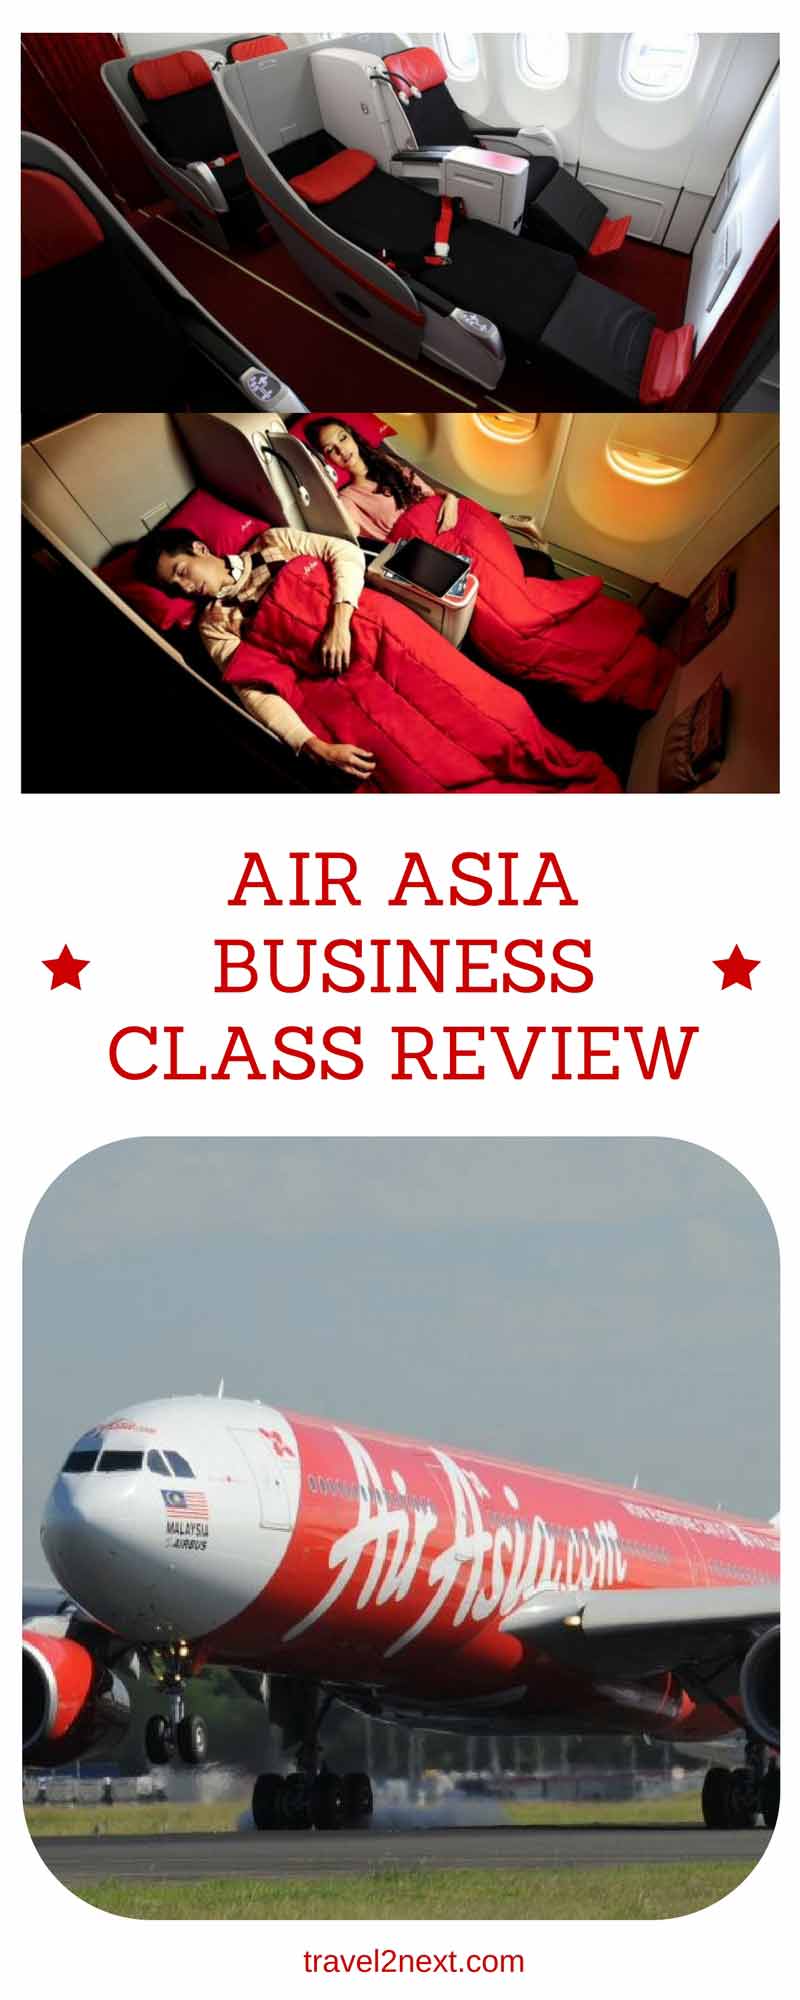 Air Asia Business Class review